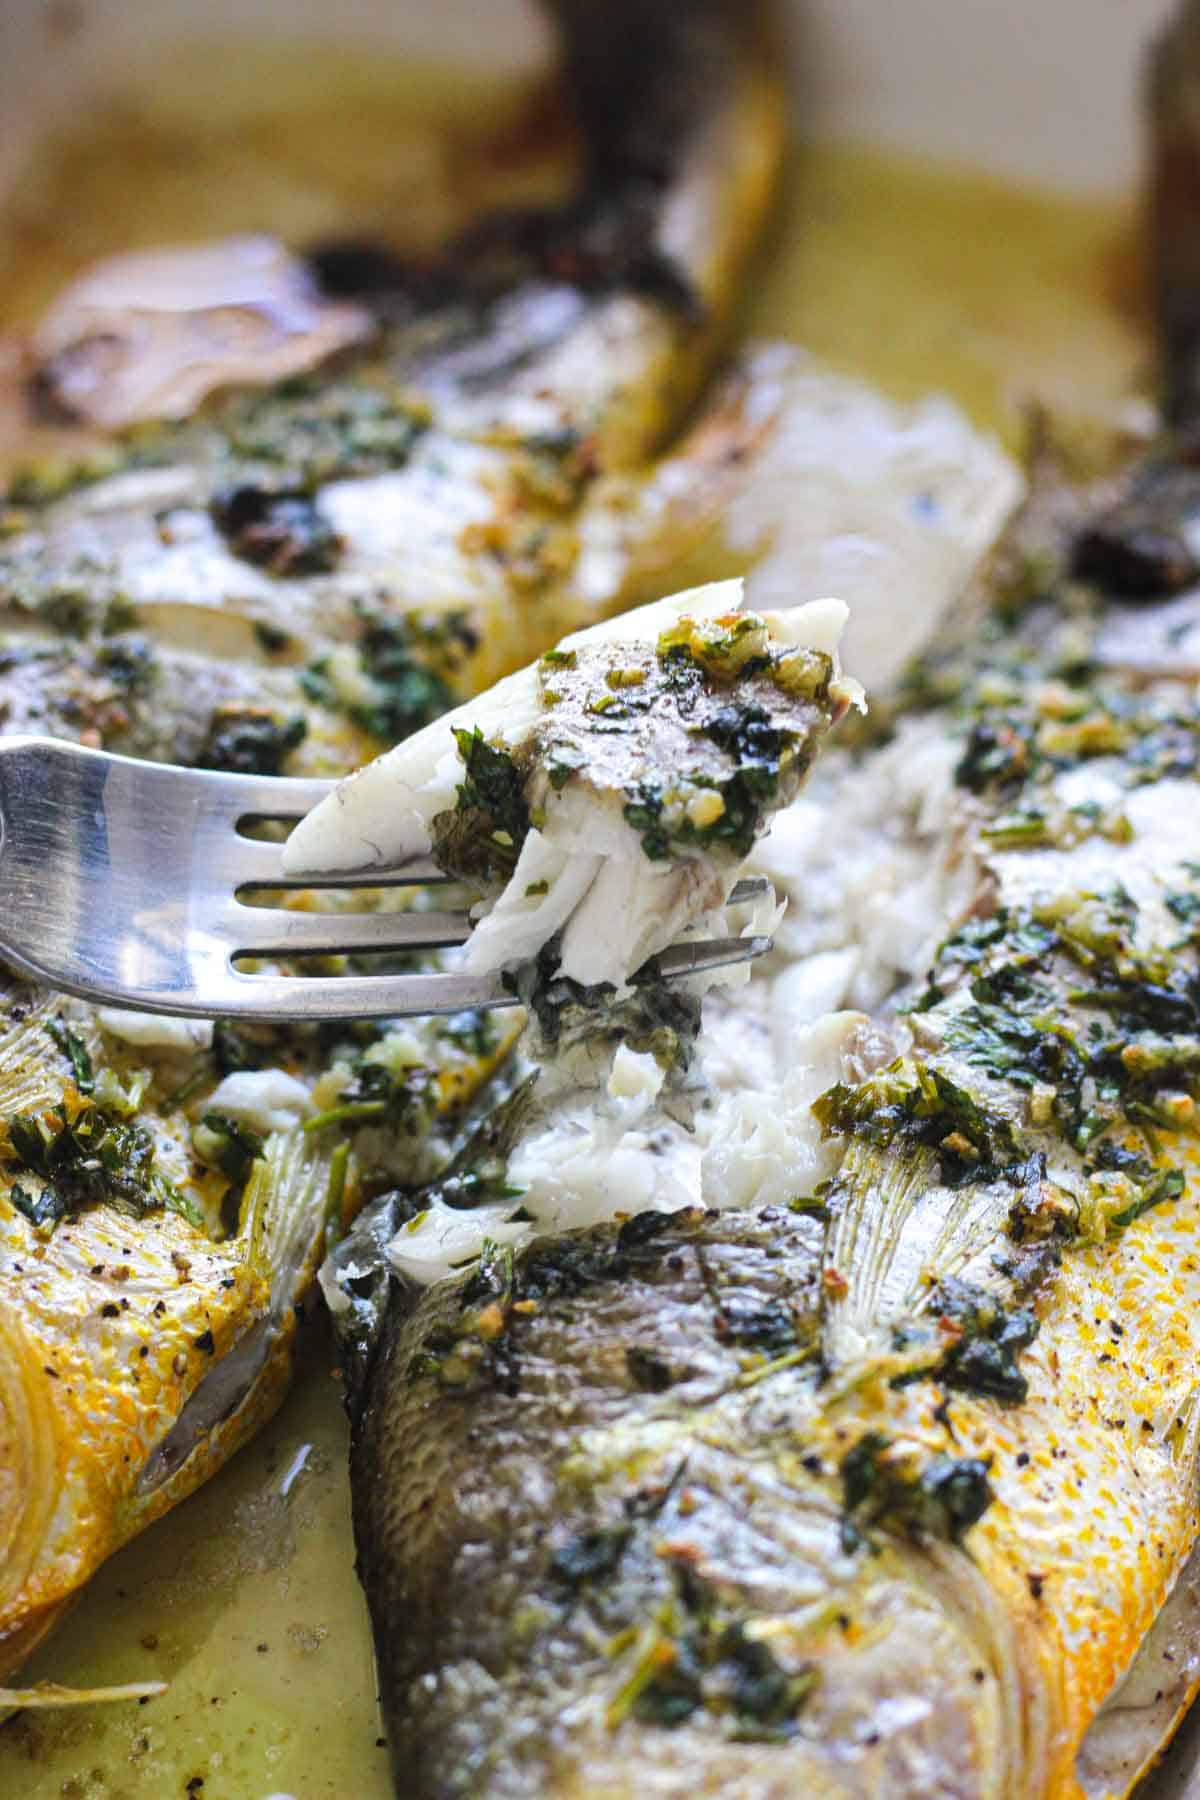 Oven baked yellow croaker recipe - The Top Meal